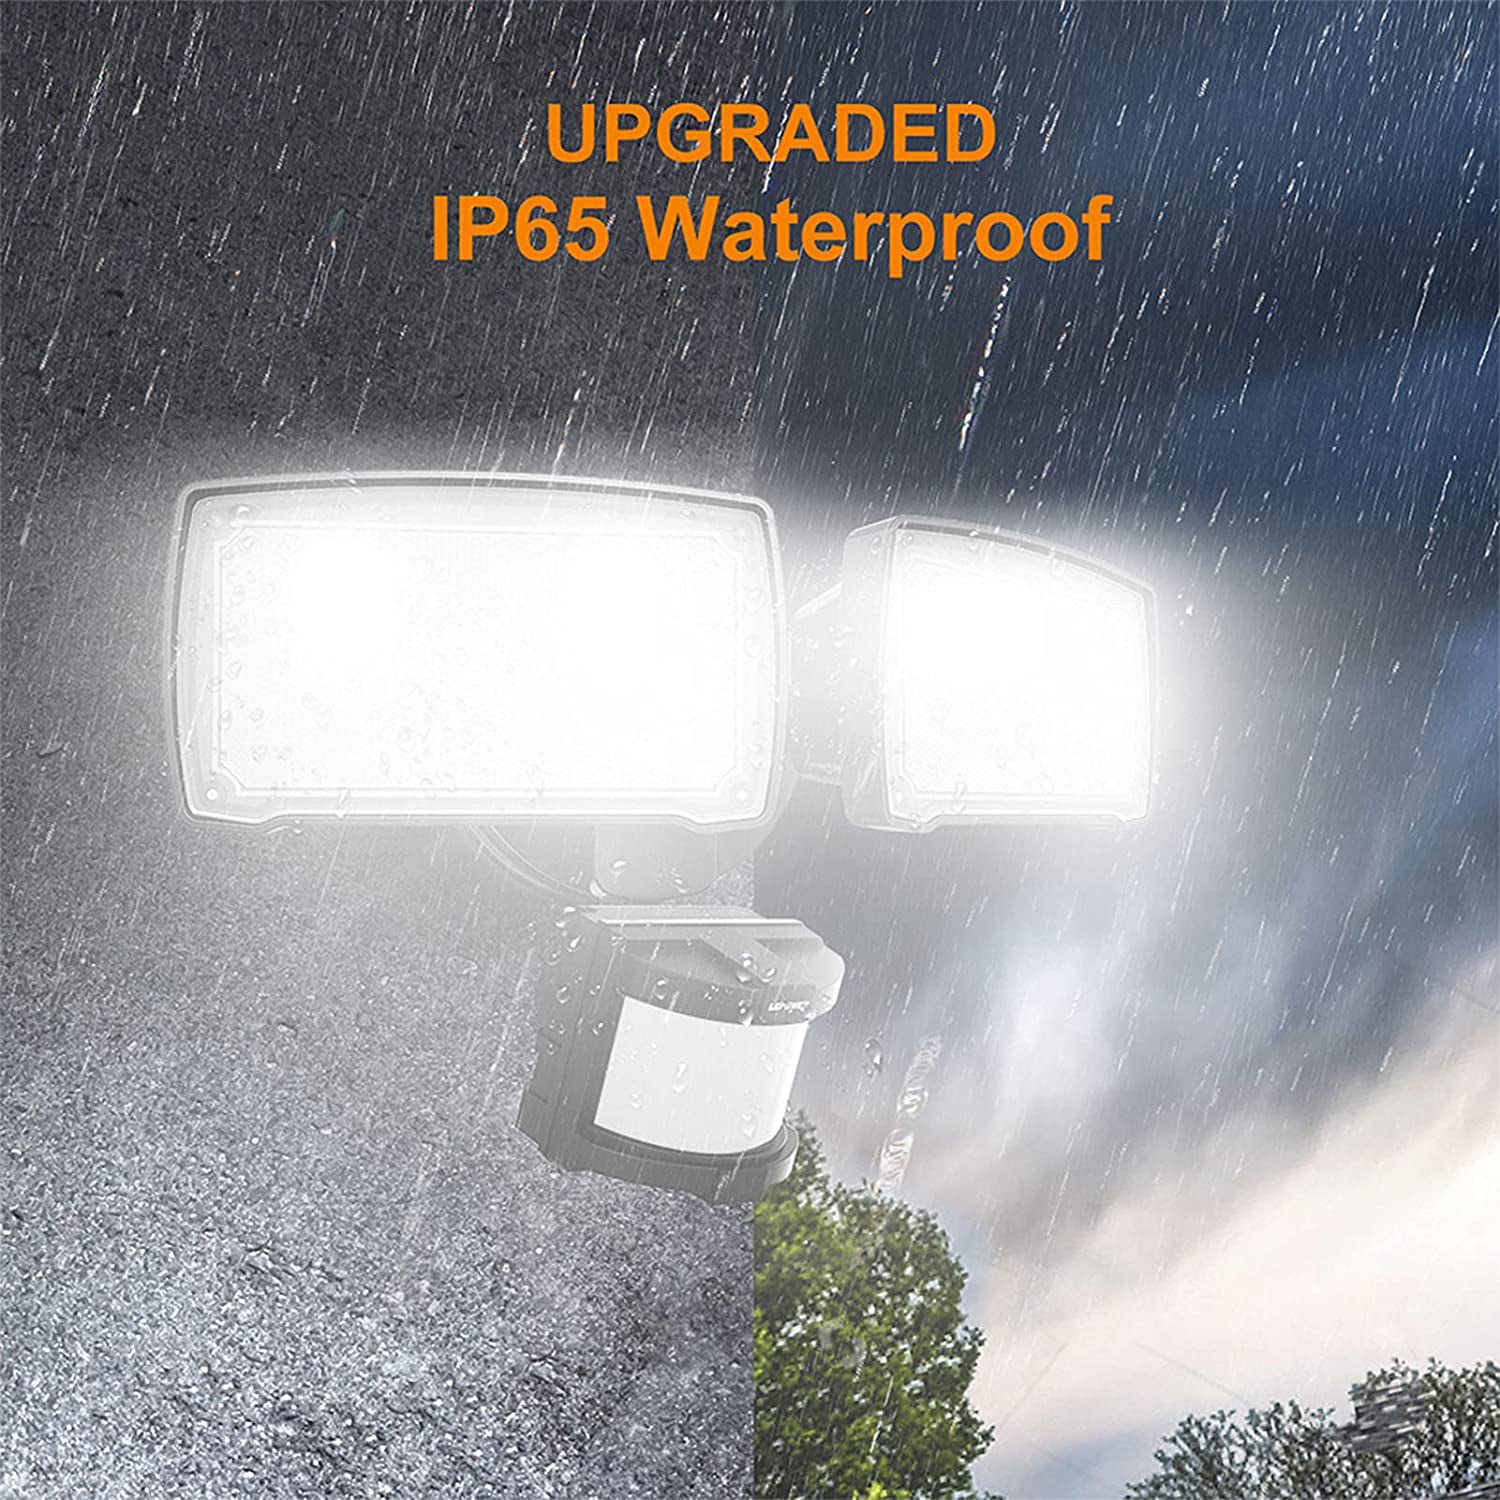 Pathway & Patio 6000K Yard 3000LM LED Flood Light Outdoor IP65 Waterproof 2 Adjustable Head Outdoor Security Light for Garage Full Metal White Light LEPOWER 28W LED Security Light Outdoor 